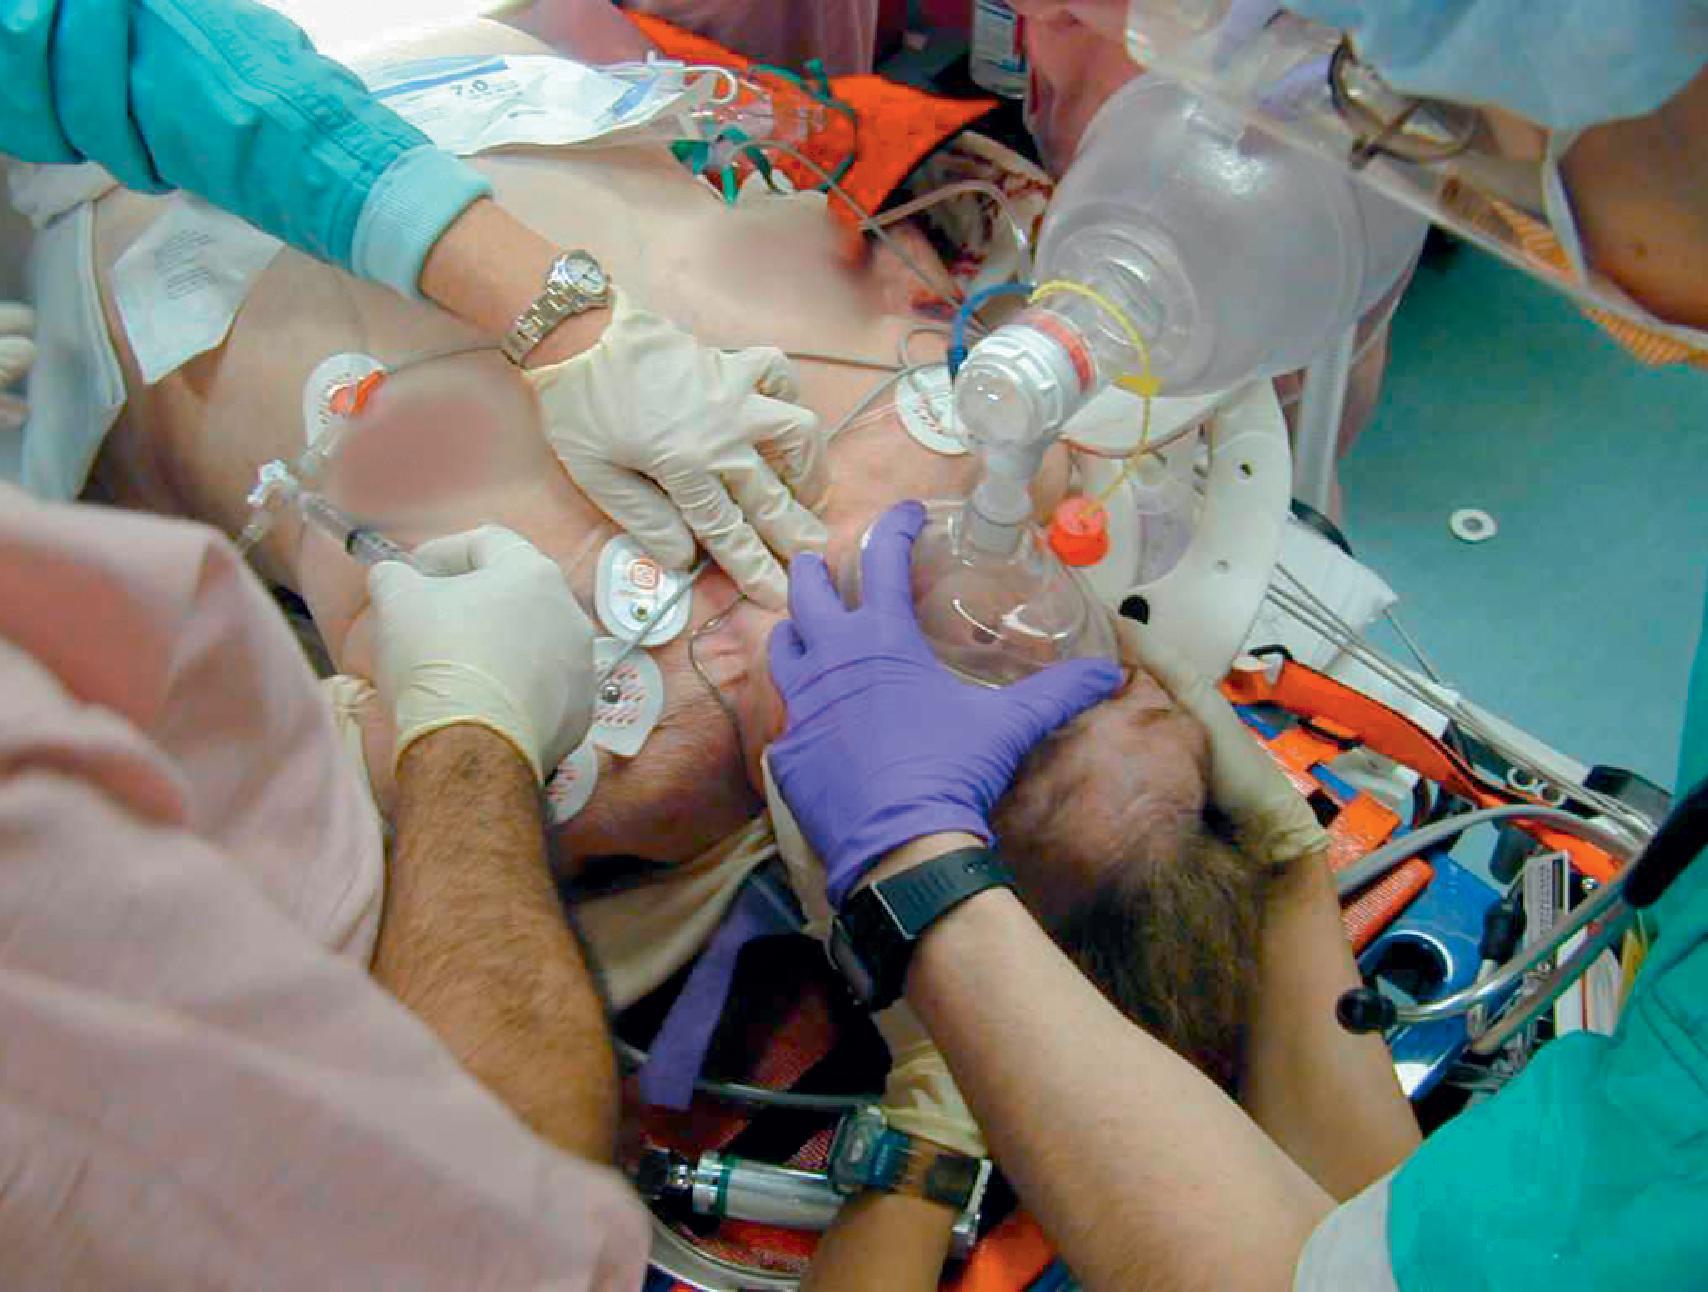 FIG. 3, Four providers are recommended for securing the airway. Providers are assigned to (1) ventilate with the bag-valve mask and intubate, (2) maintain in-line cervical stabilization, (3) administer cricoid pressure, and (4) administer drugs and assist with airway devices.